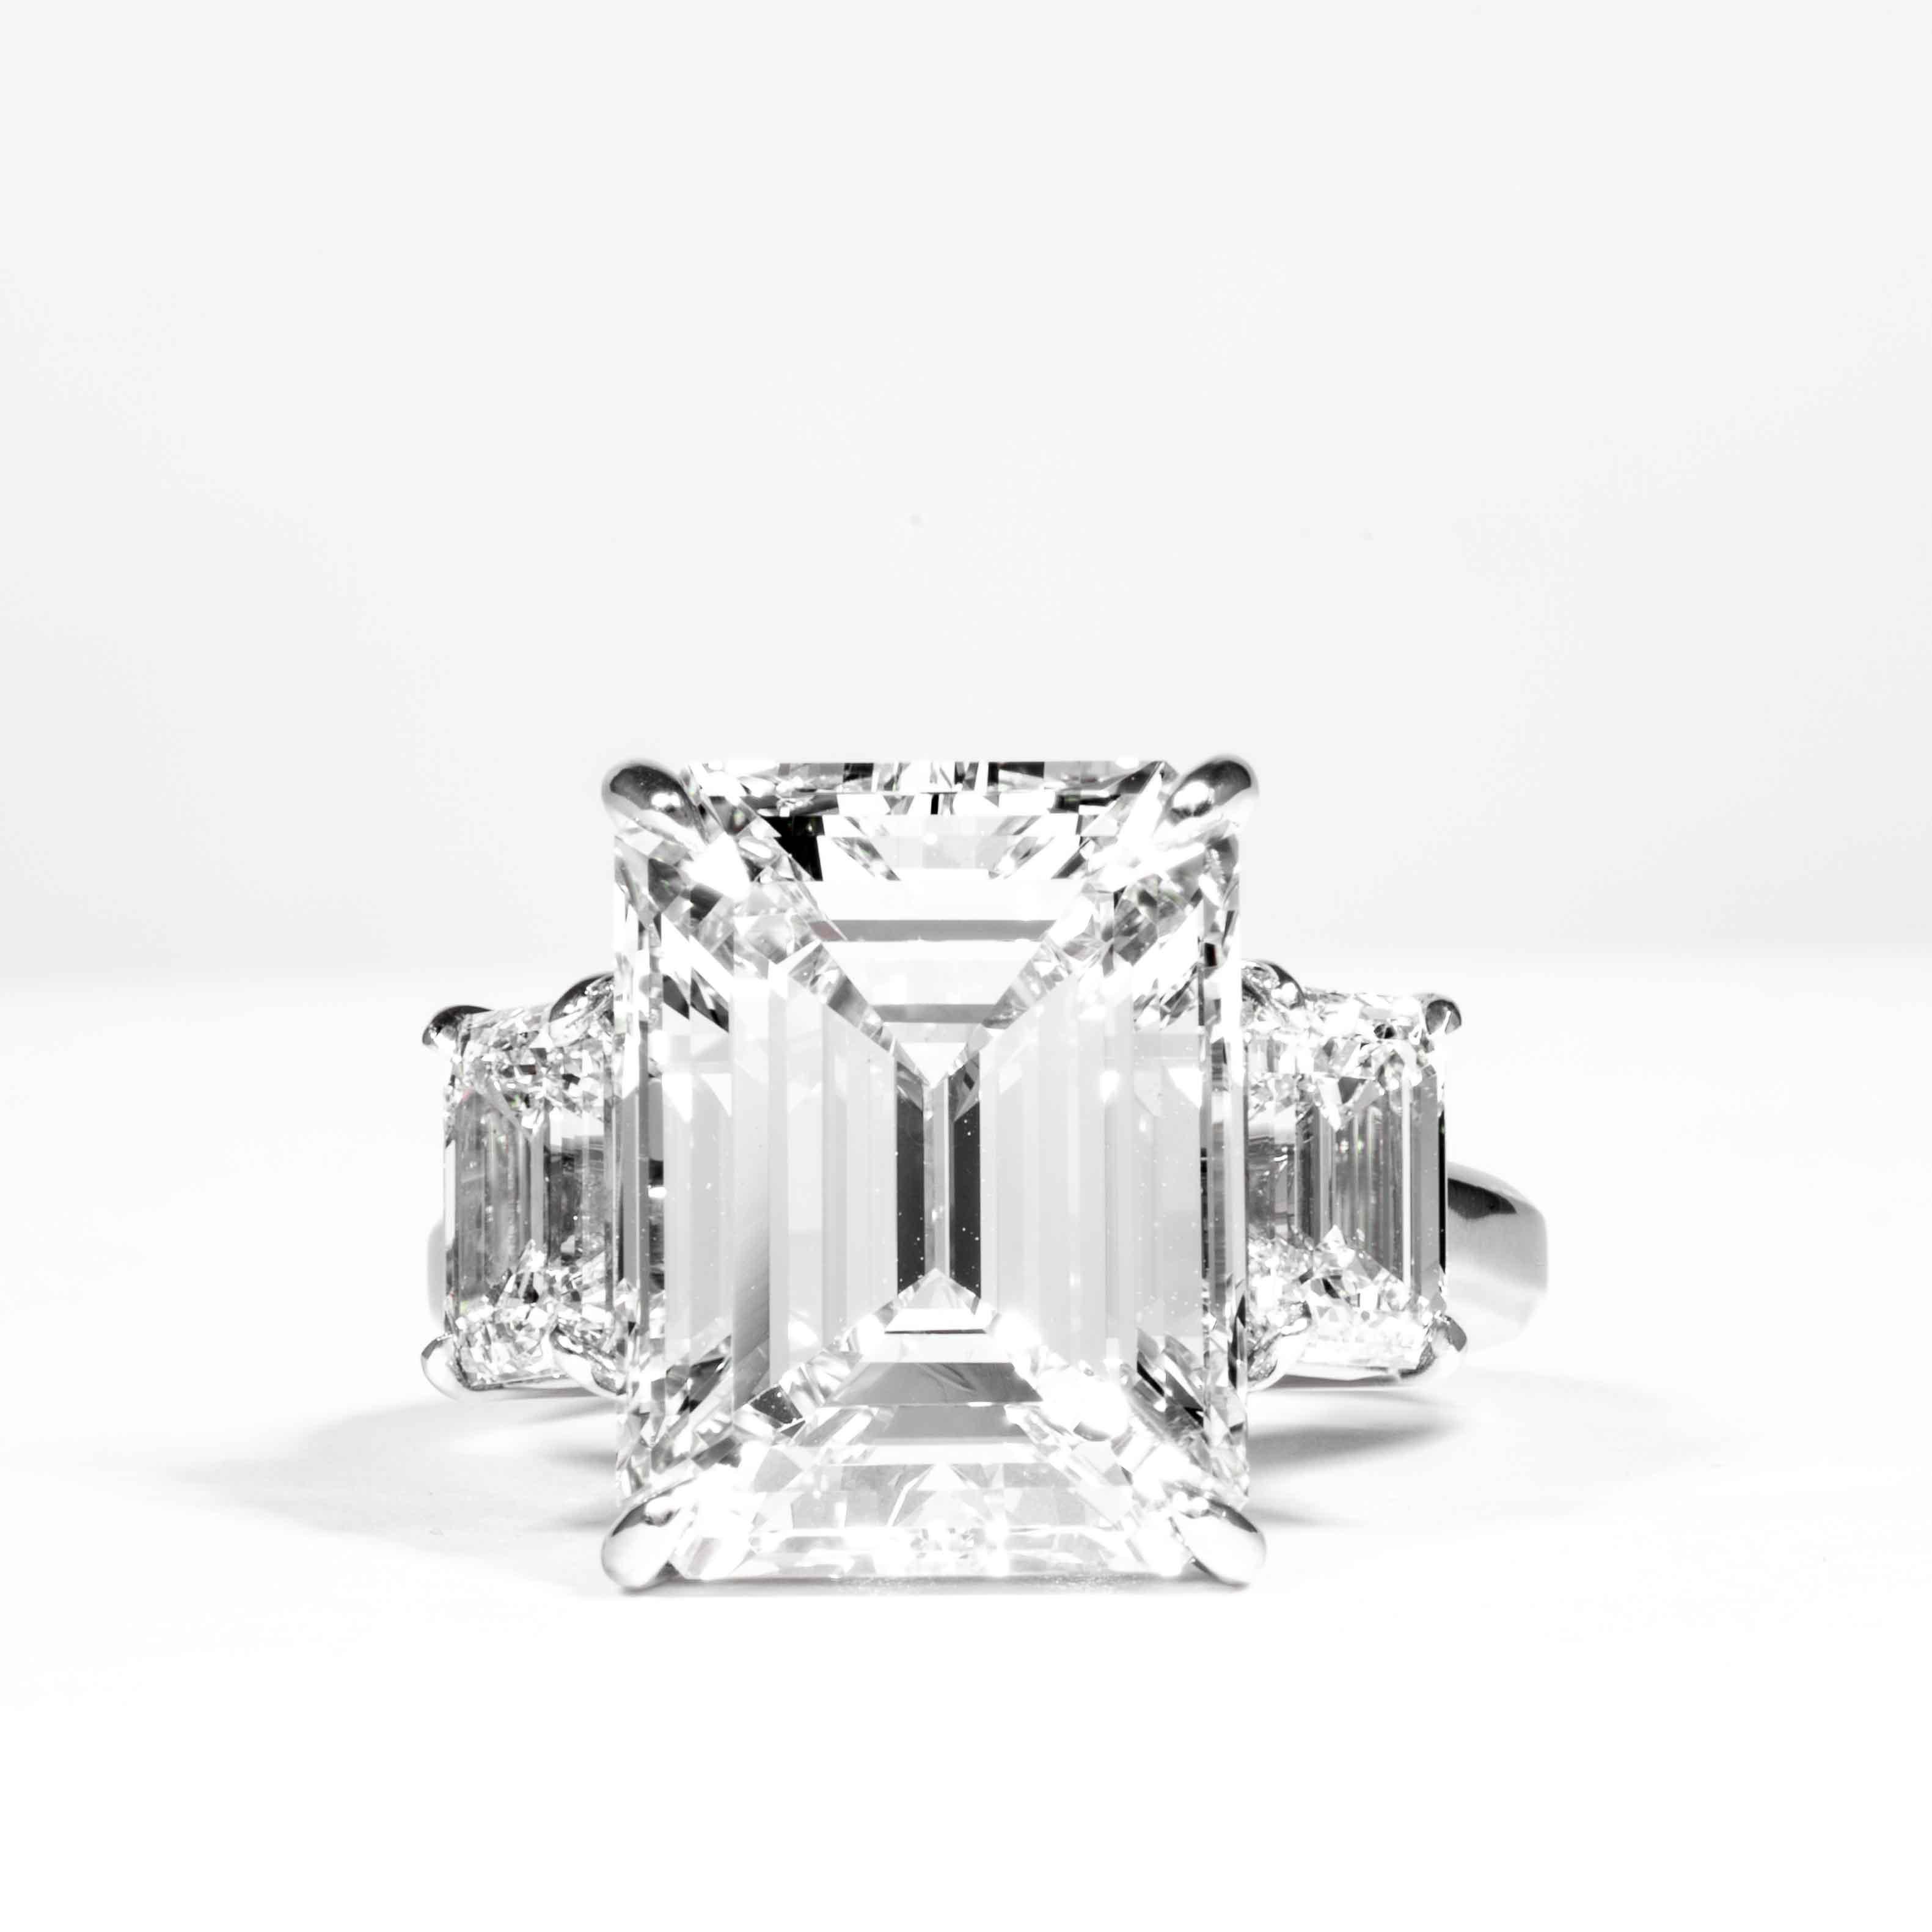 This 3-Stone diamond ring is offered by Shreve, Crump & Low. This 10.75 carat GIA Certified K VS2 emerald cut diamond measuring 14.35 x 11.08 x 7.43 mm is custom set in a handcrafted Shreve, Crump & Low platinum 3-stone ring. The 10.75 carat emerald